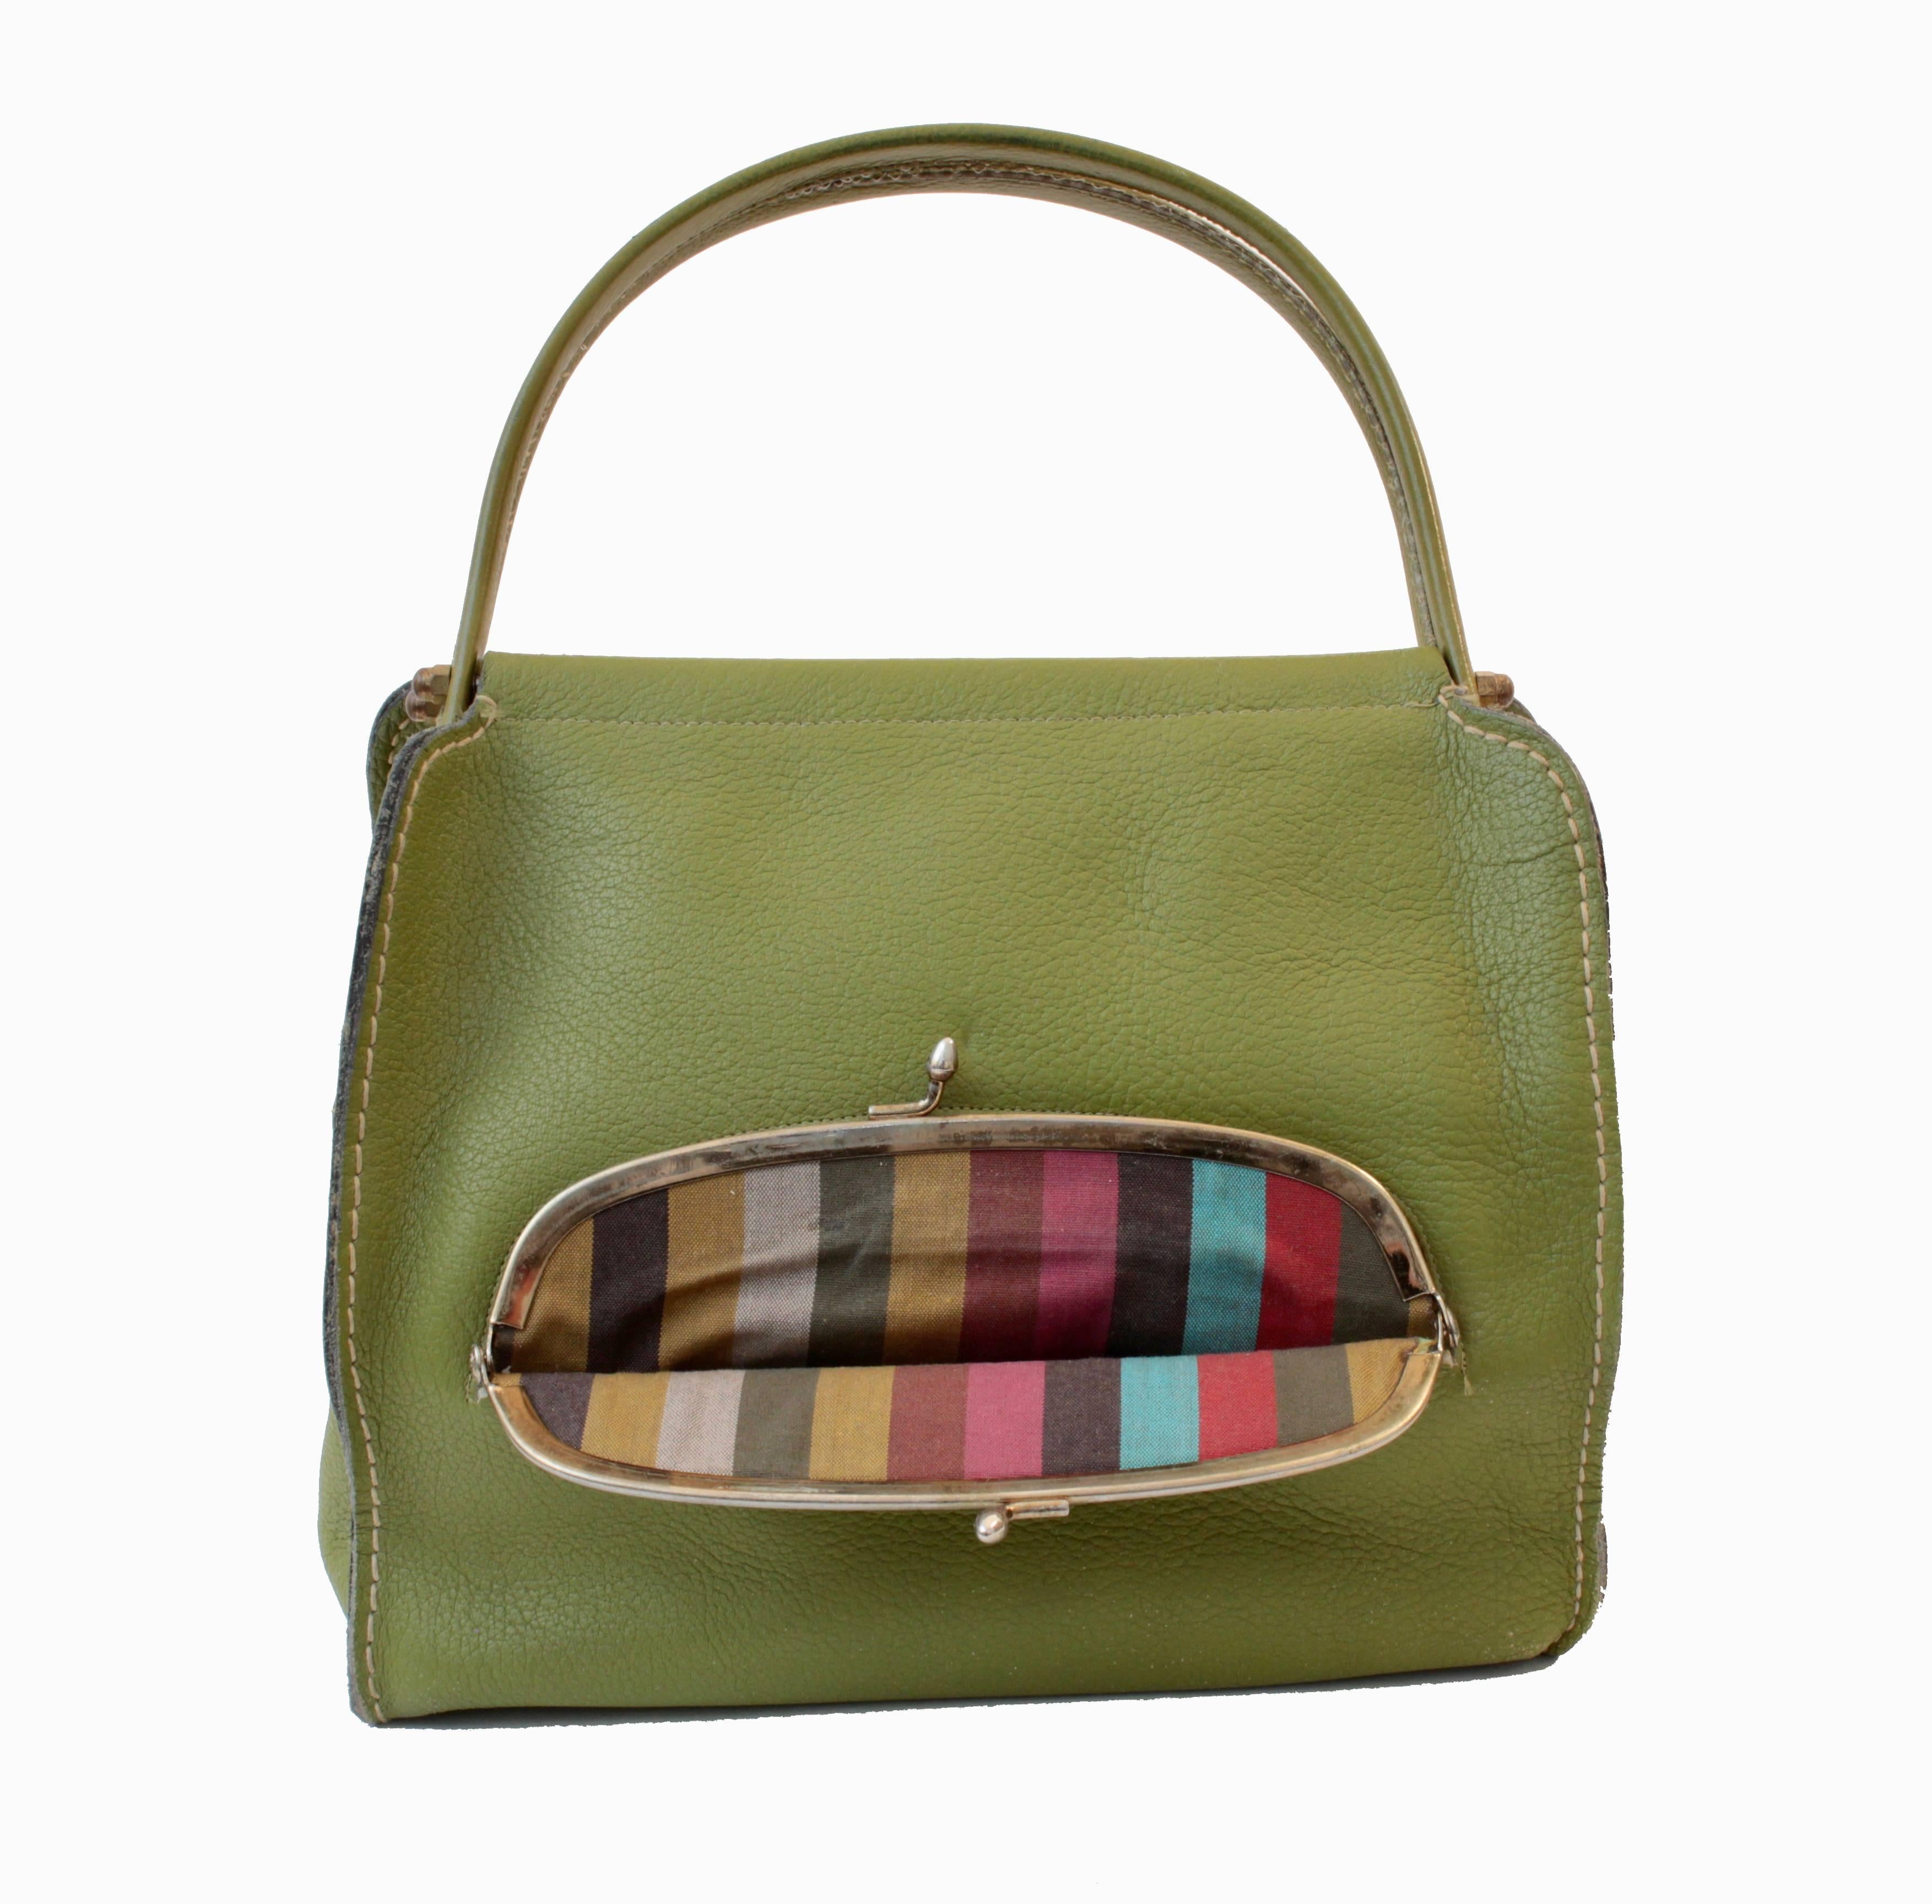 This cool little bag was designed by Bonnie Cashin during her time at Coach Leatherware in the 1960s.  Made from lime green leather, it features a large brass kiss lock coin purse in front, and double leather covered handles.  Inside is lined in